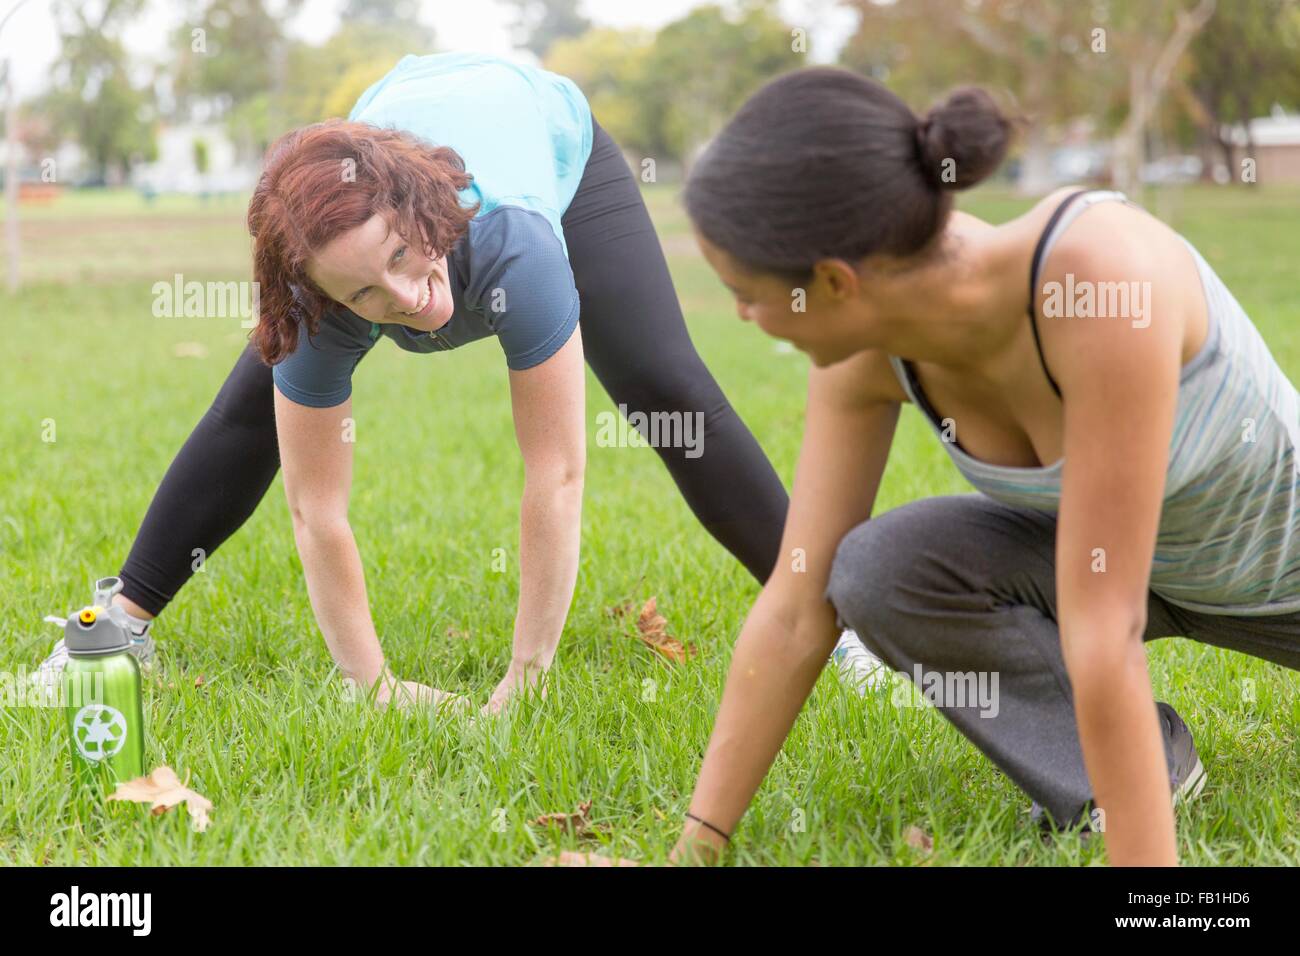 Young women wearing sports clothing on grass face to face bending over stretching Stock Photo